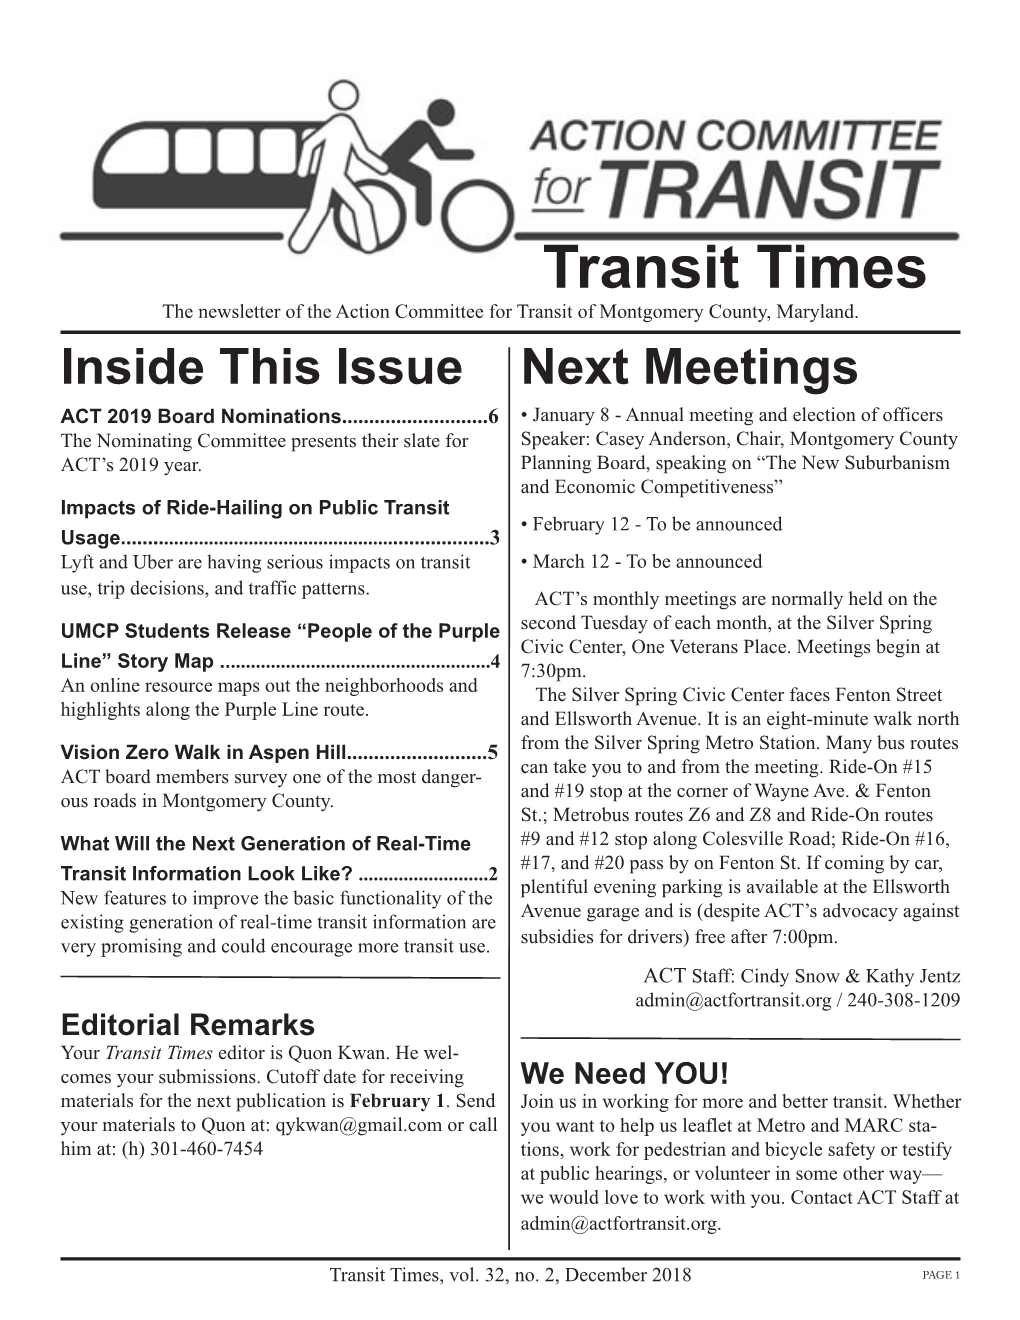 Transit Times the Newsletter of the Action Committee for Transit of Montgomery County, Maryland